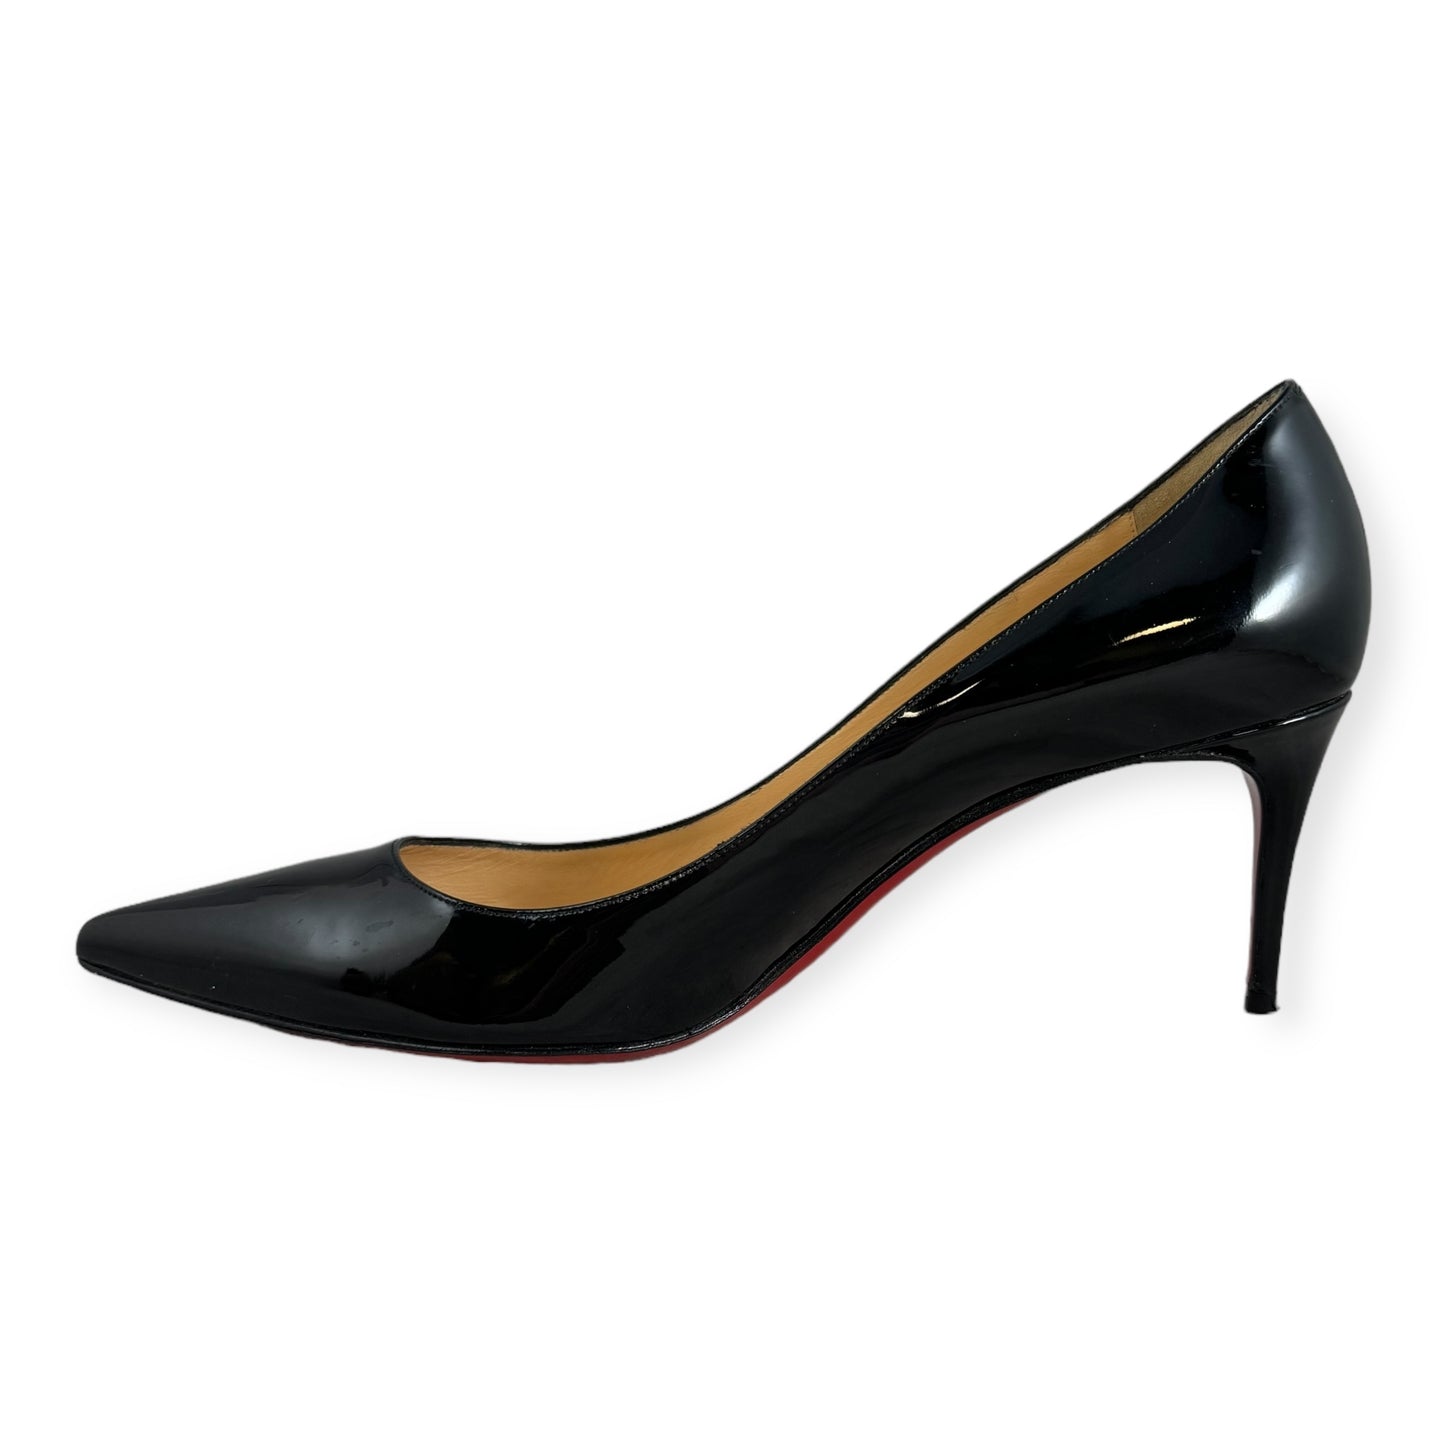 CHRISTIAN LOUBOUTIN Patent Midheel Pumps in Black | Size 38.5